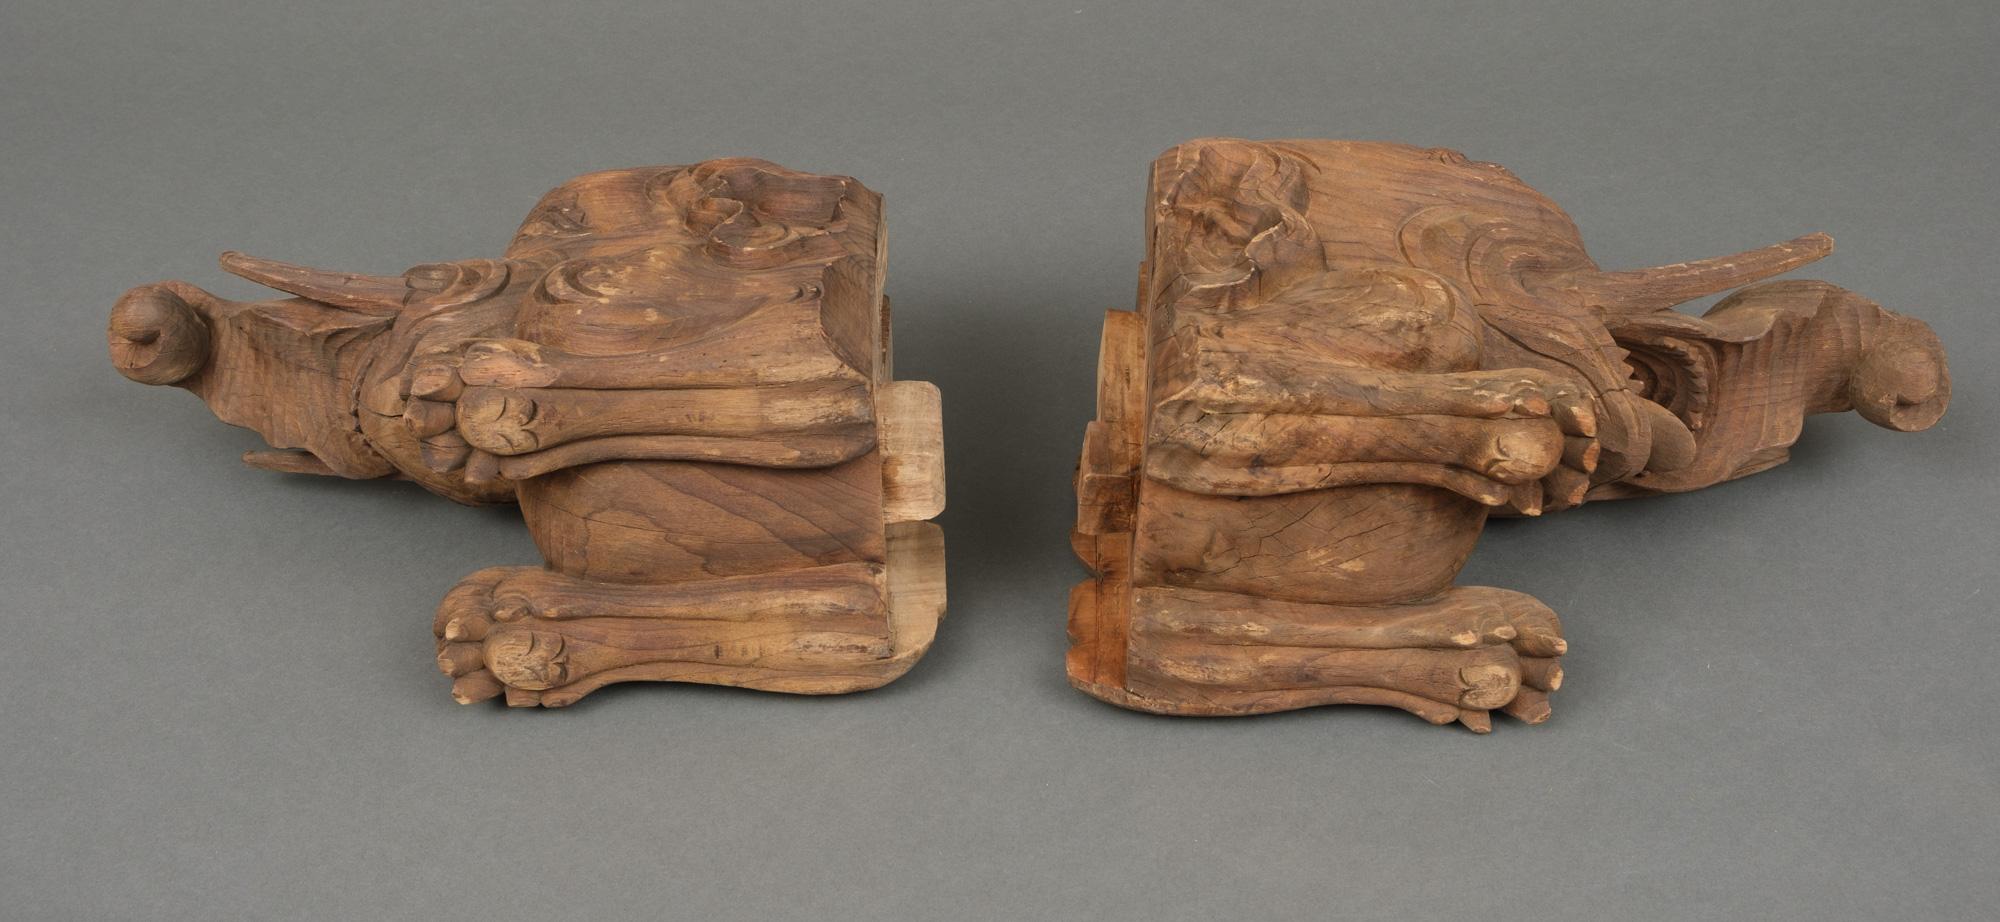 Pair of Japanese Carved Wooden Temple Ornaments 木鼻 'Kibana' Shaped like Baku 獏 For Sale 2